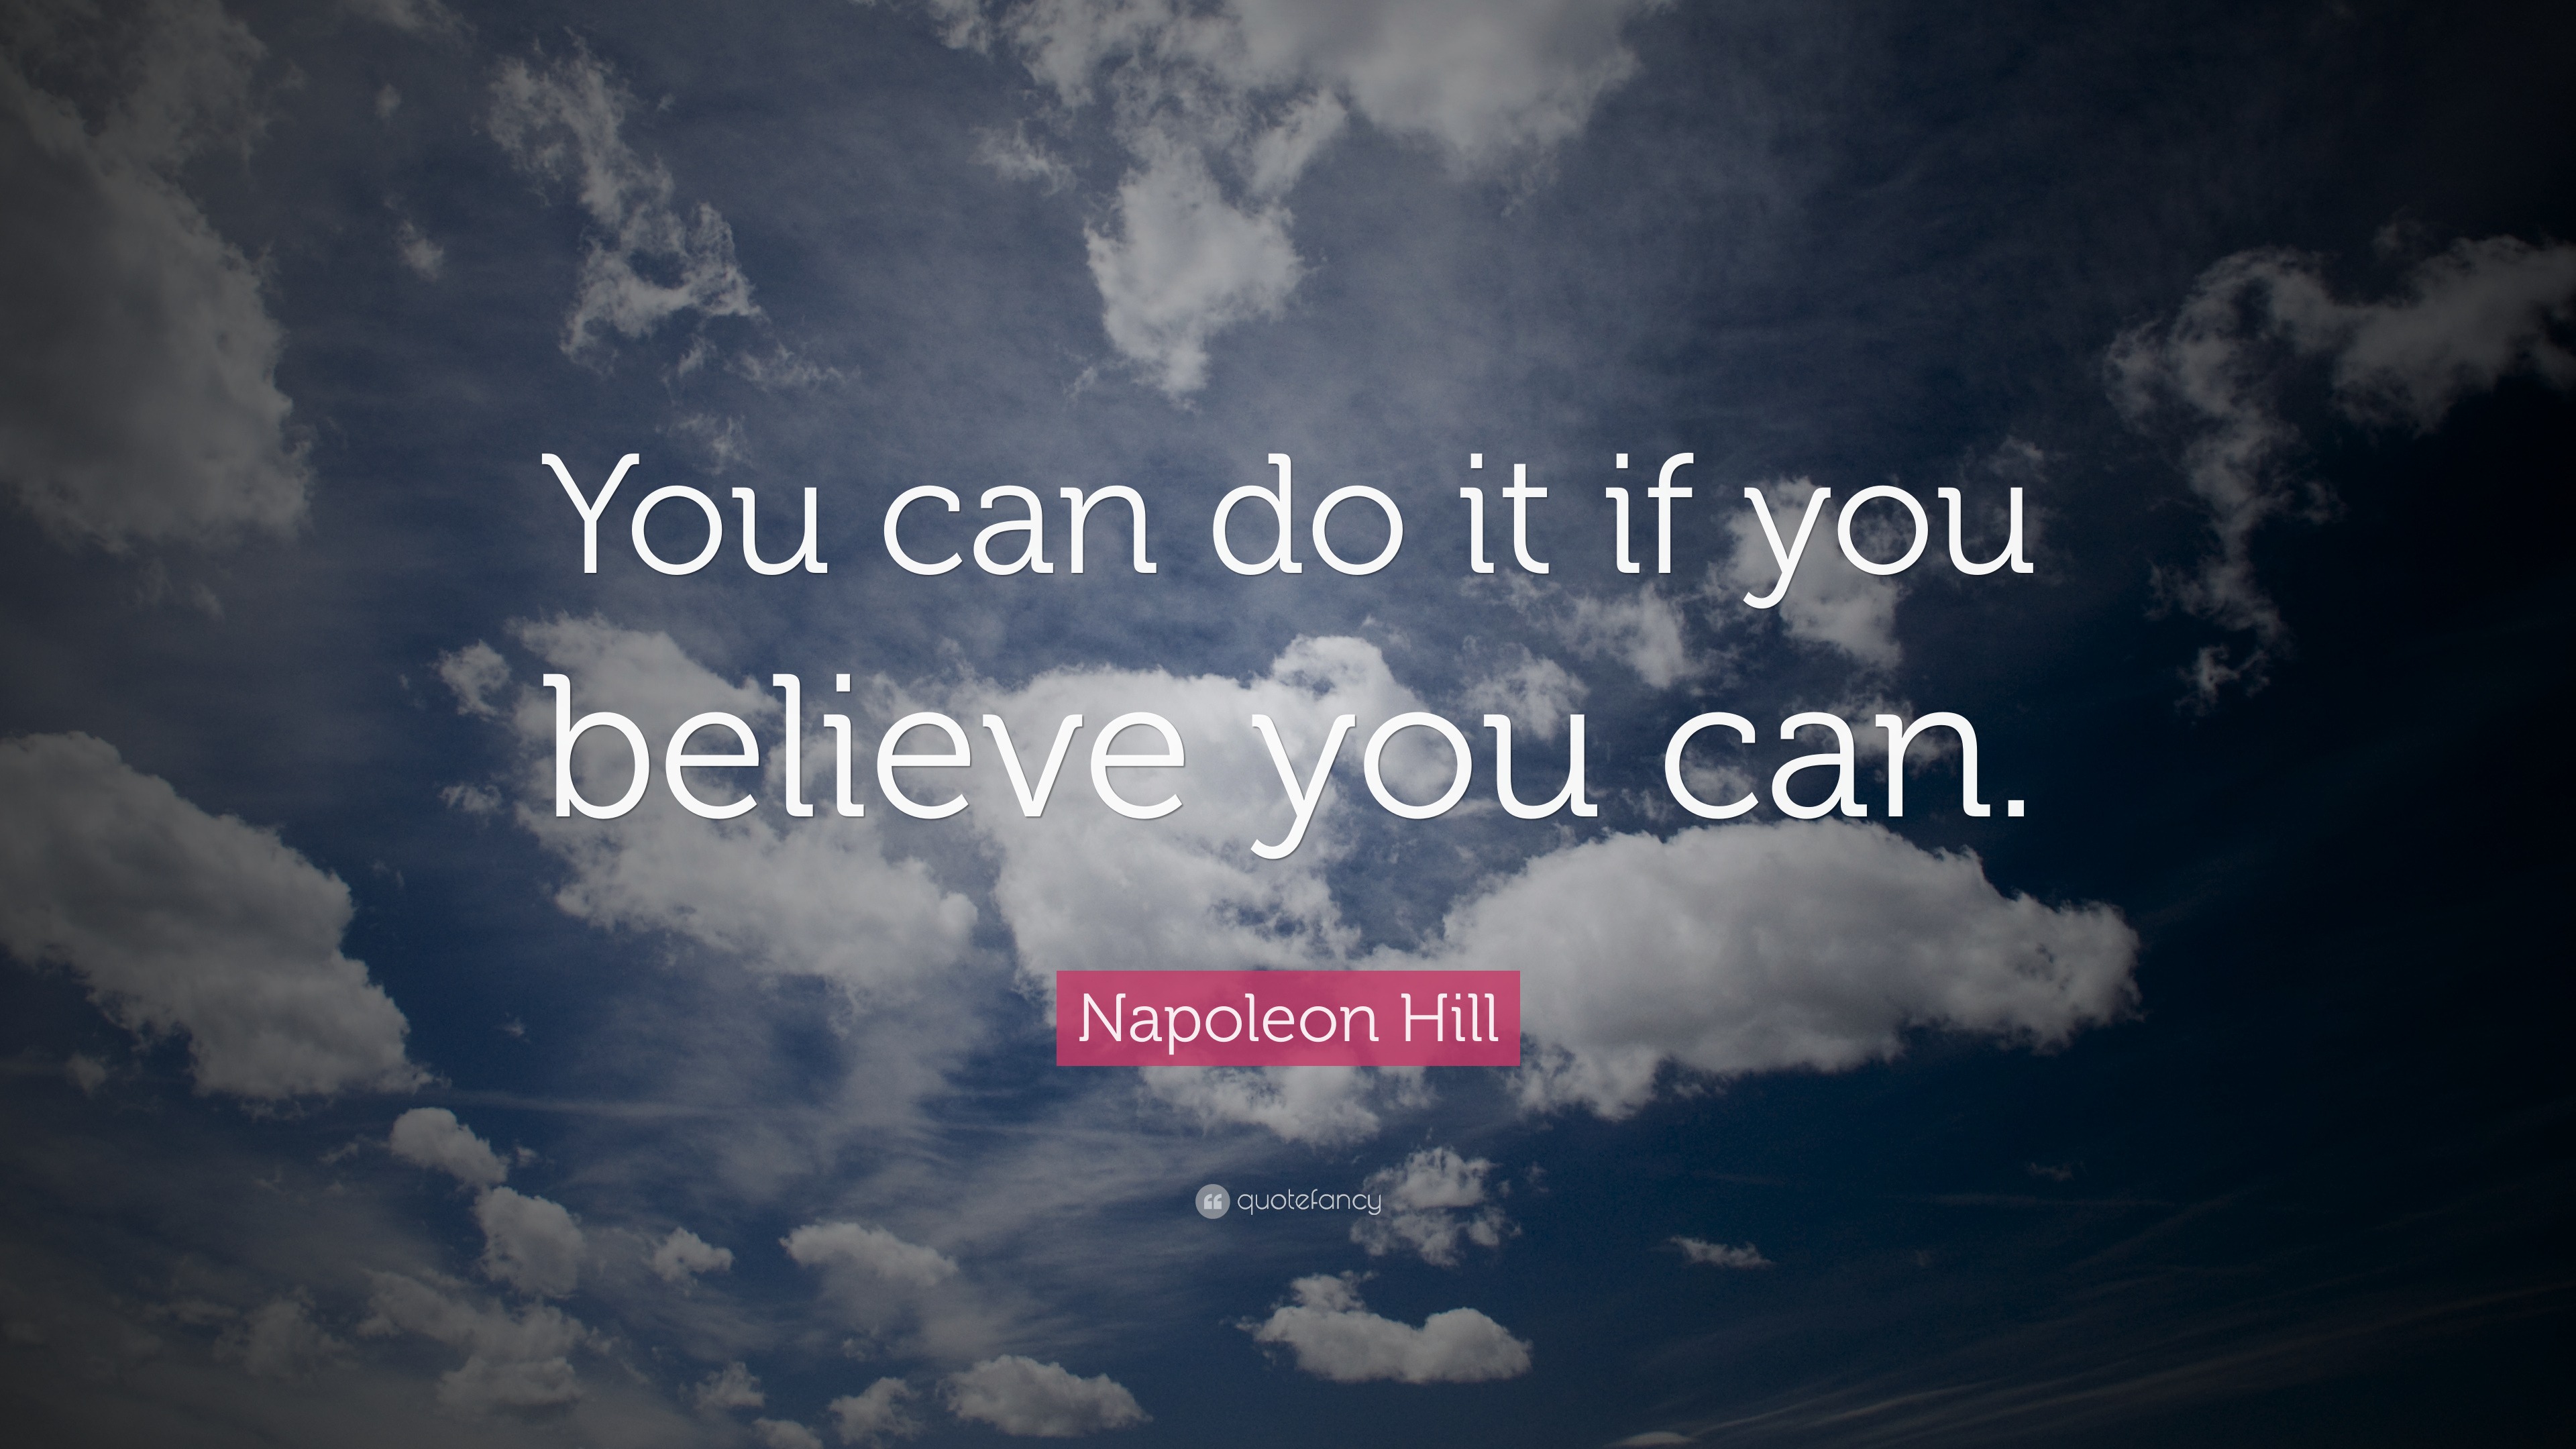 Napoleon Hill Quote: “You can do it if you believe you can.”